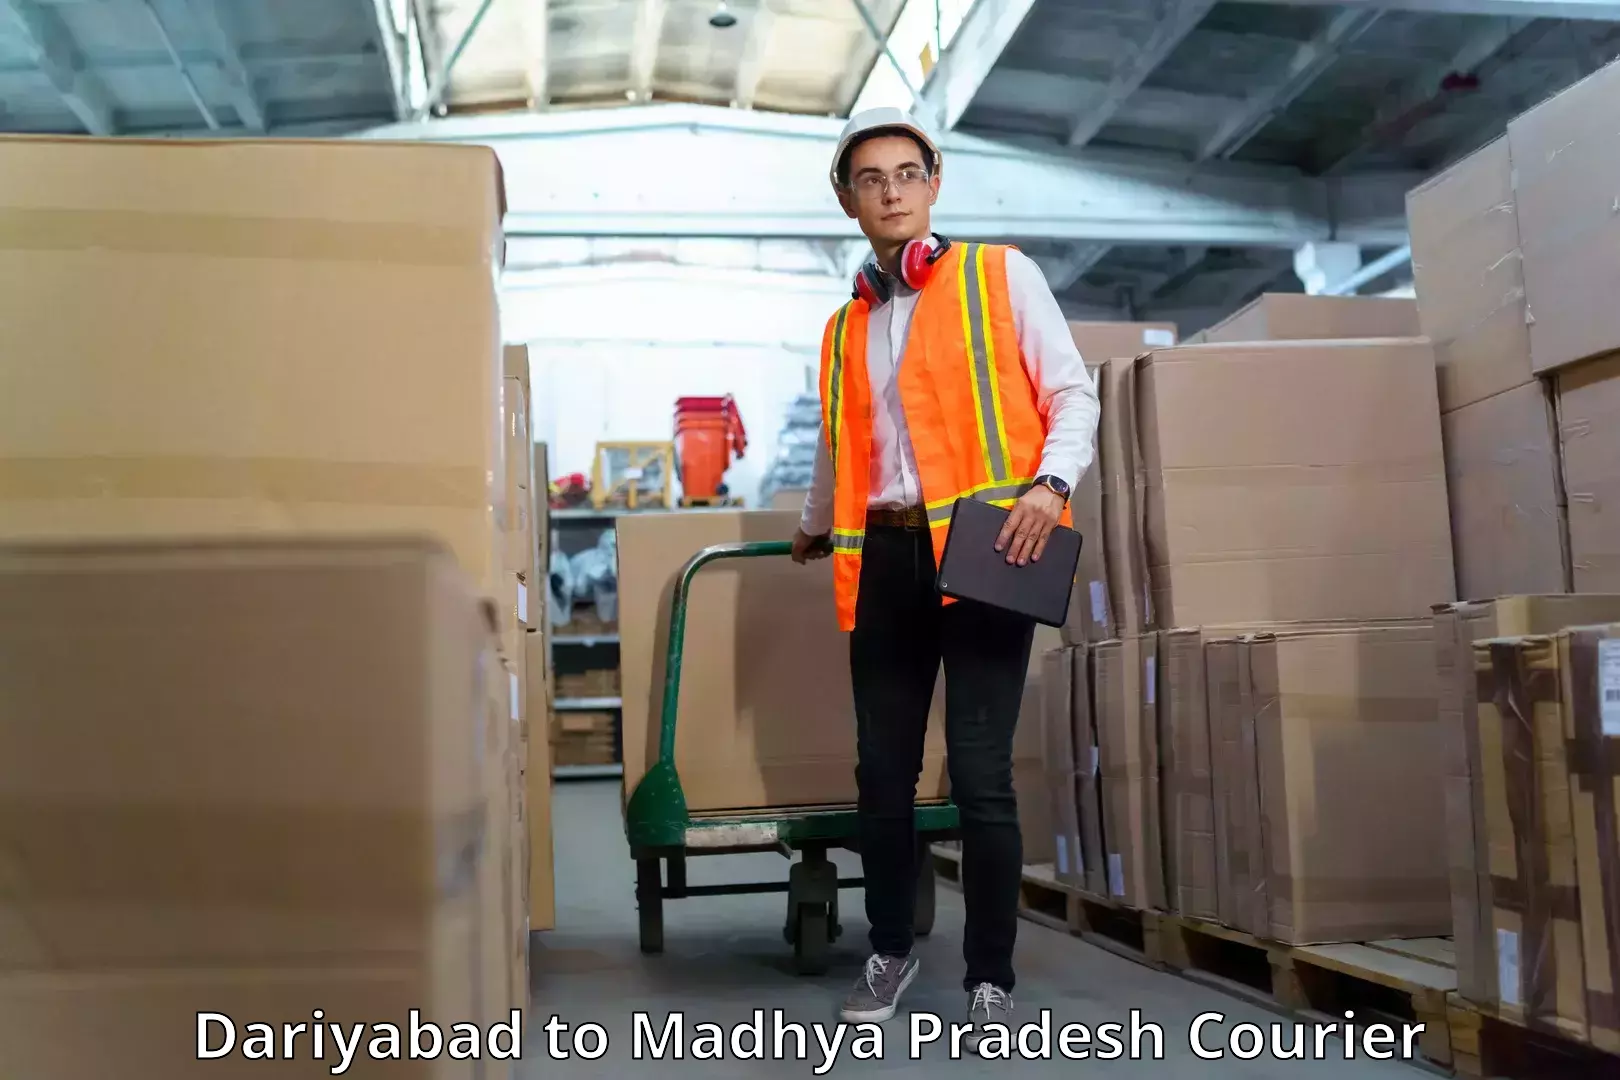 Express delivery network Dariyabad to IIT Indore